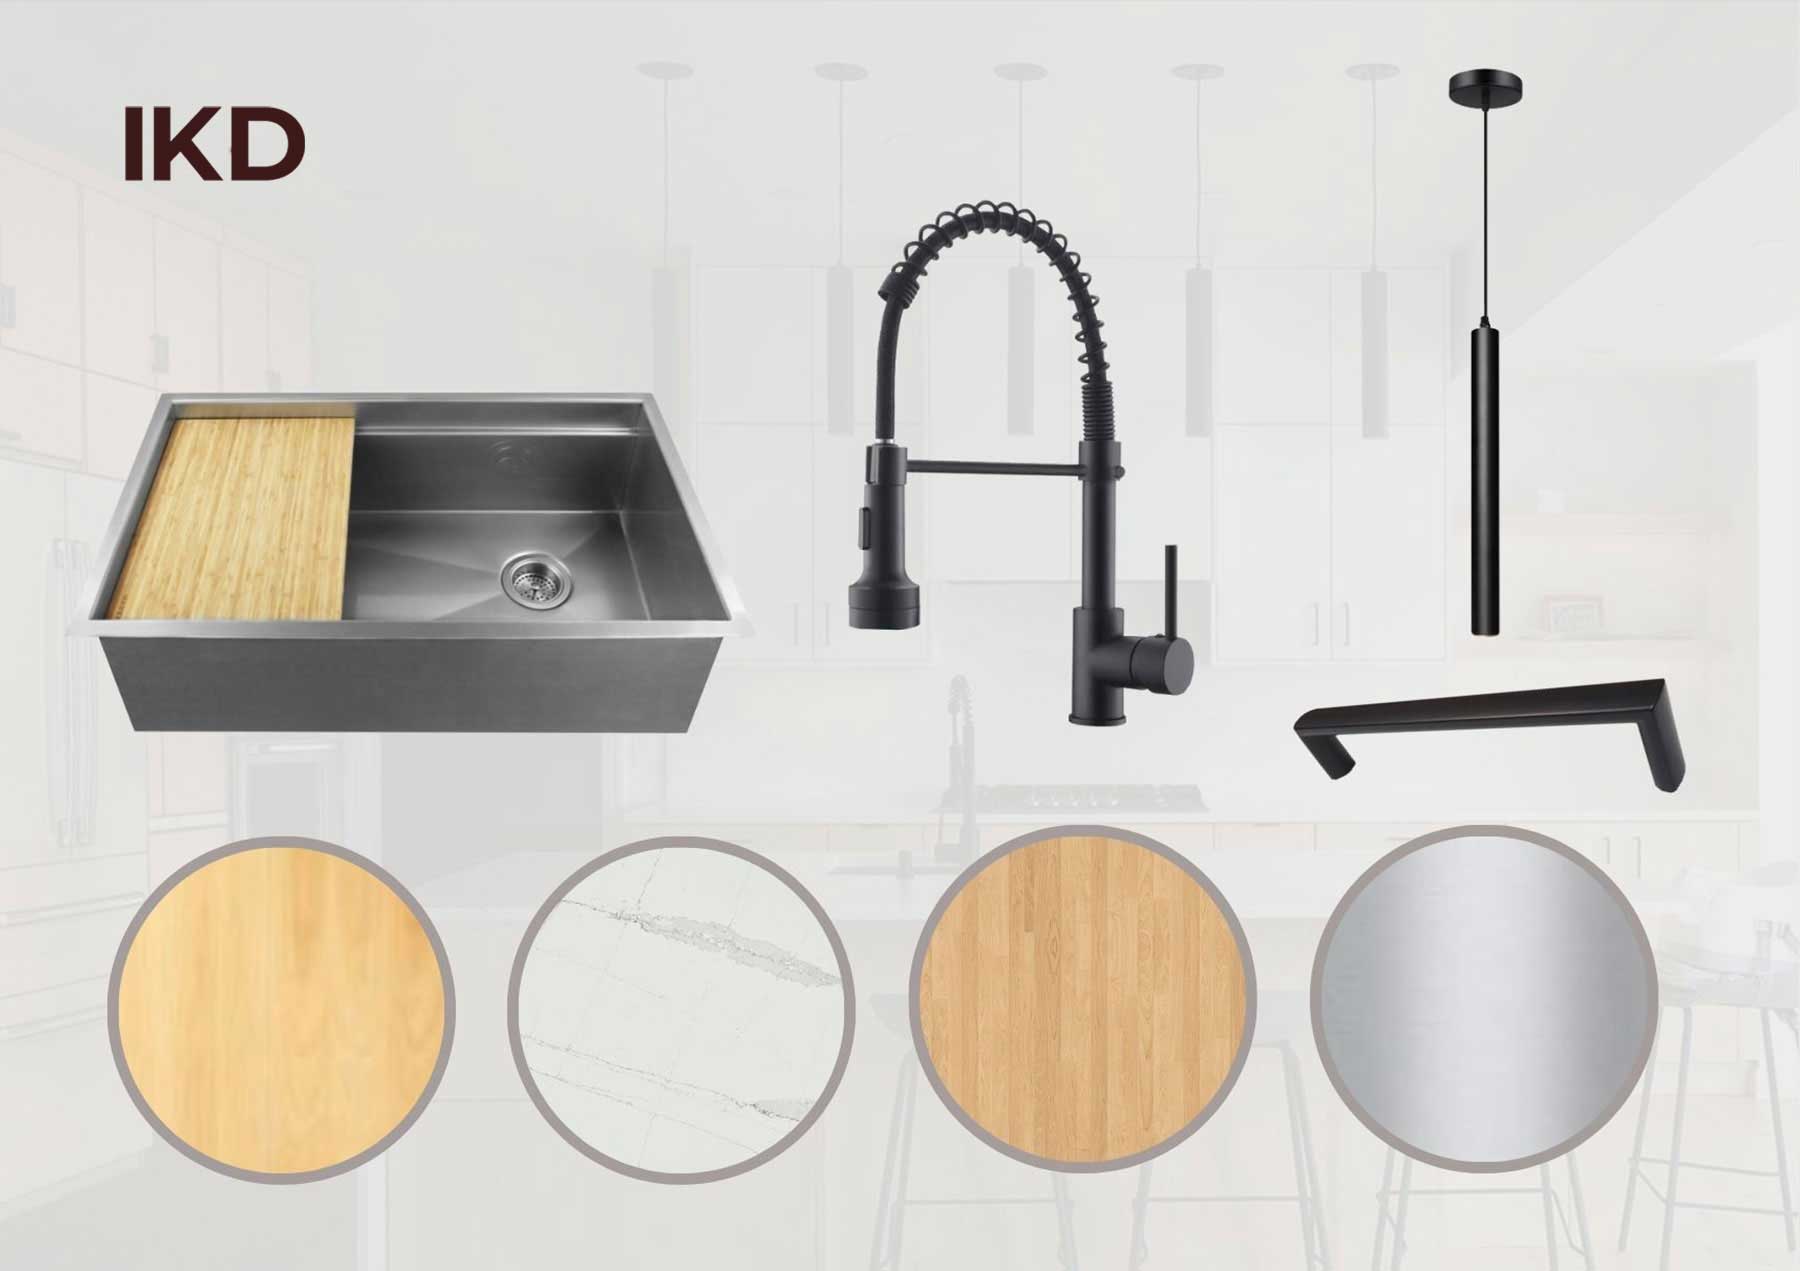 Making your IKEA Kitchen more personalized and luxurious.